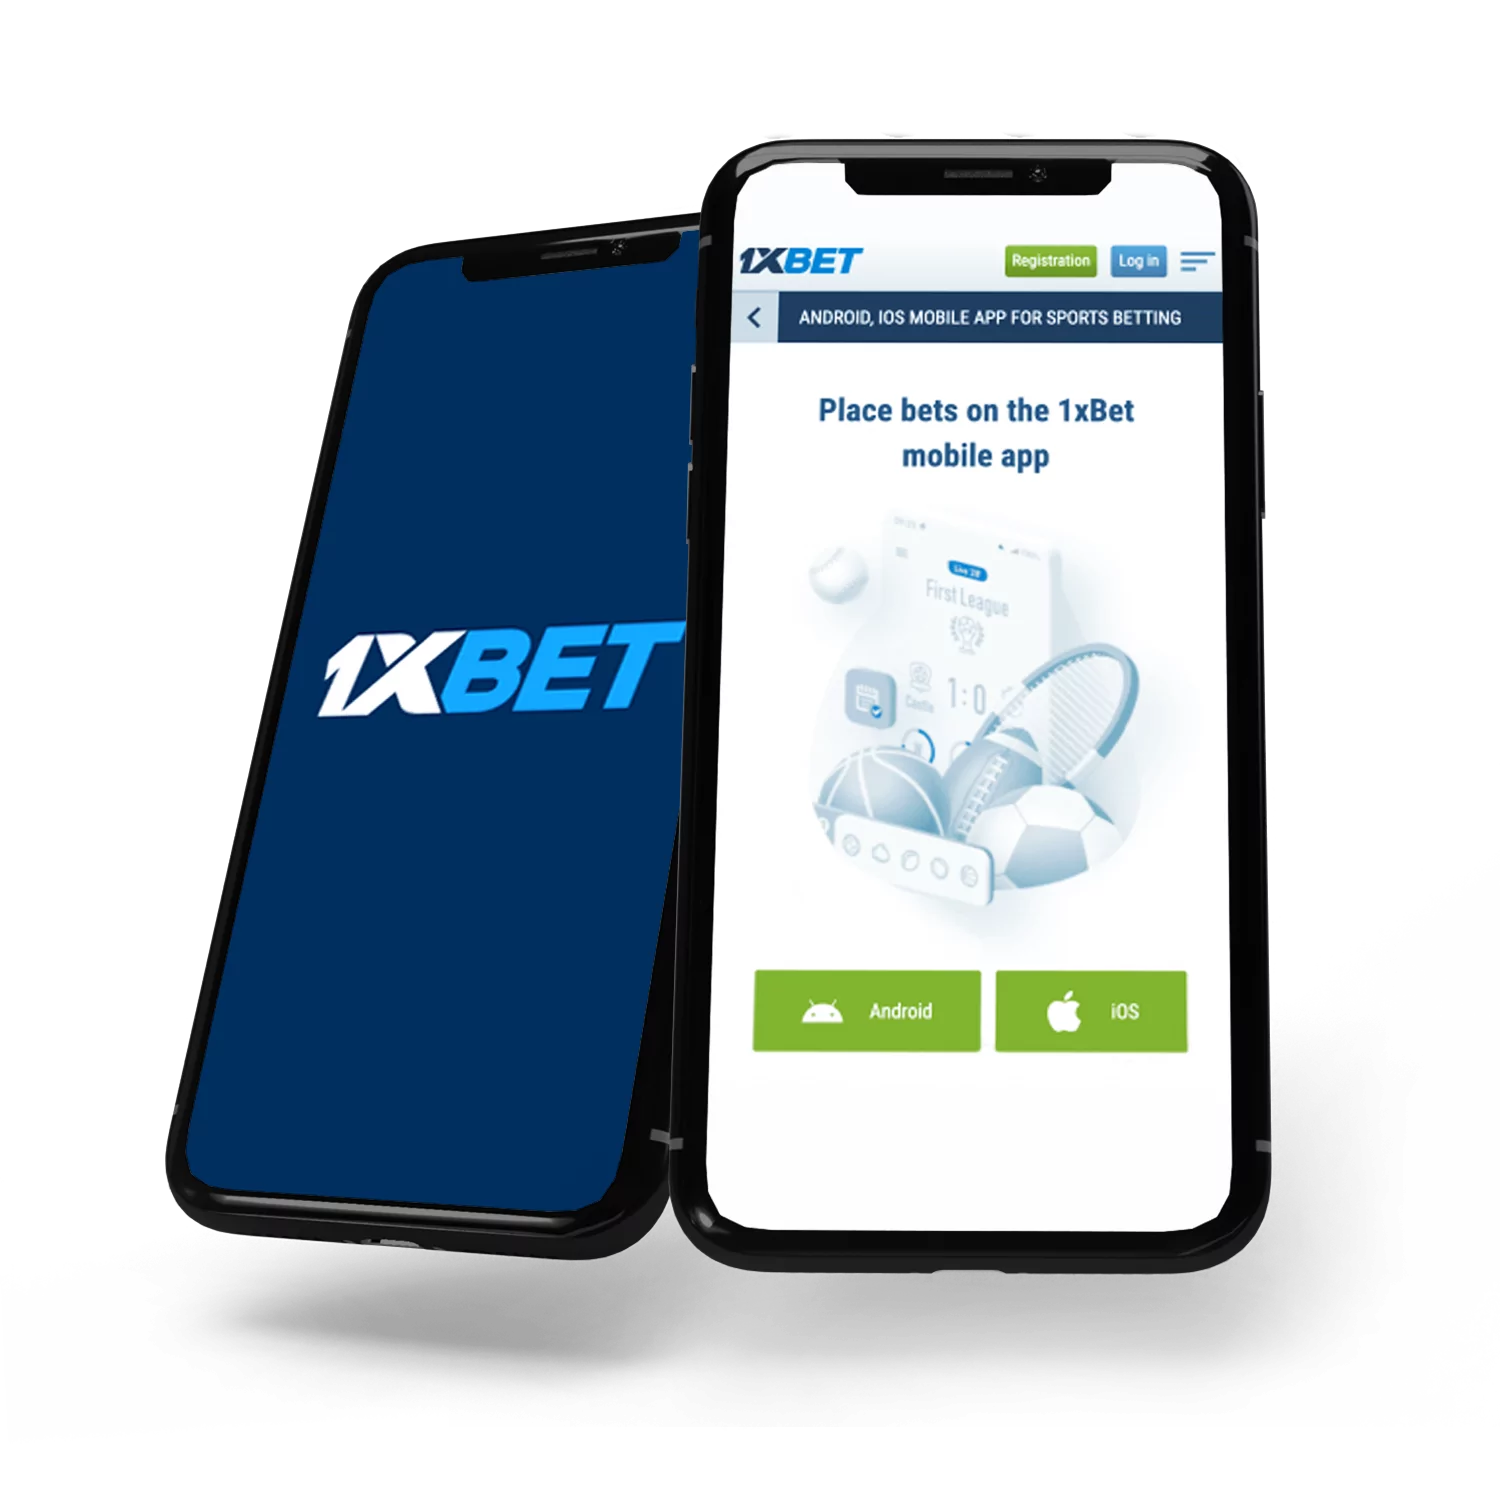 The 1xBet mobile app is available on Android and iOS smartphones.